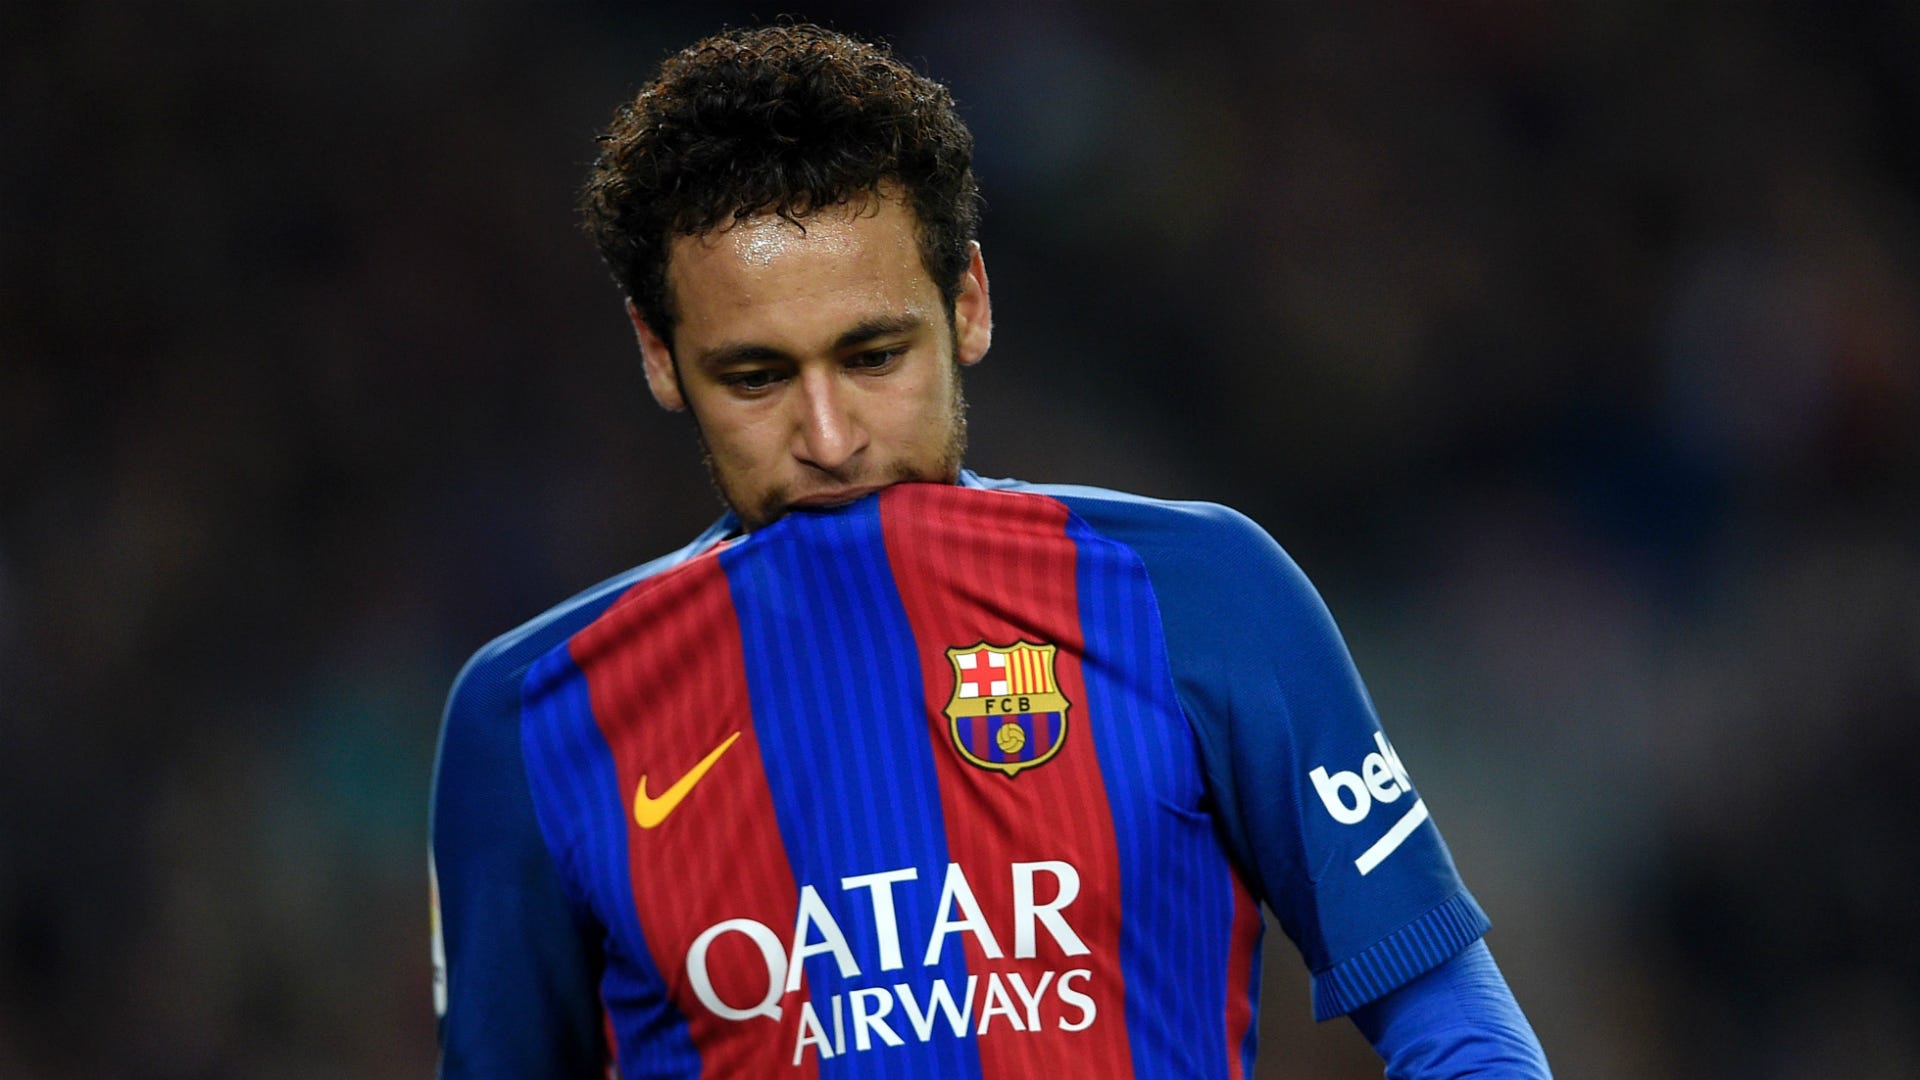 Neymar Jr Opens up About His Future at PSG - EssentiallySports